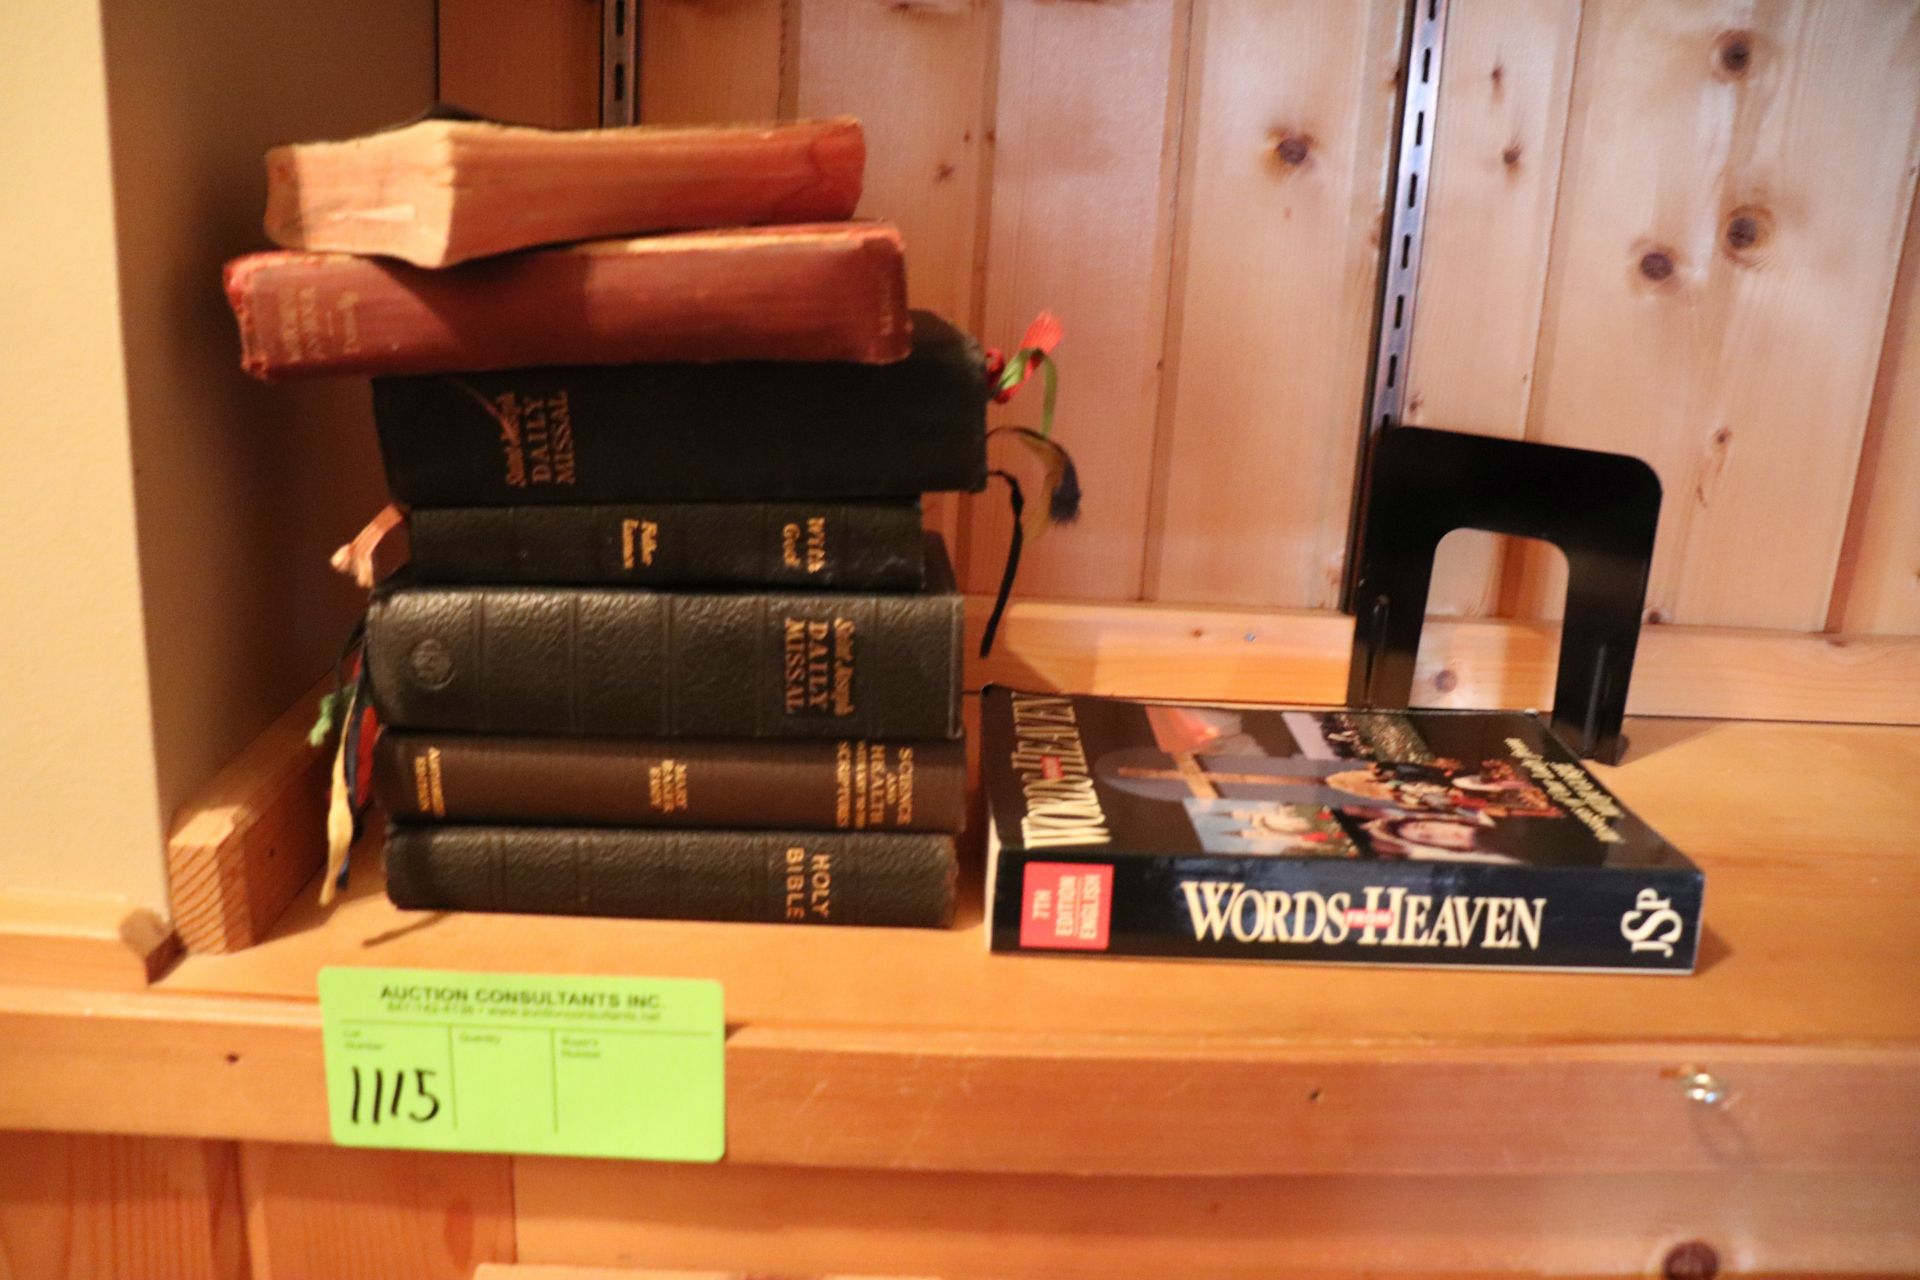 Miscellaneous Bibles and religious text